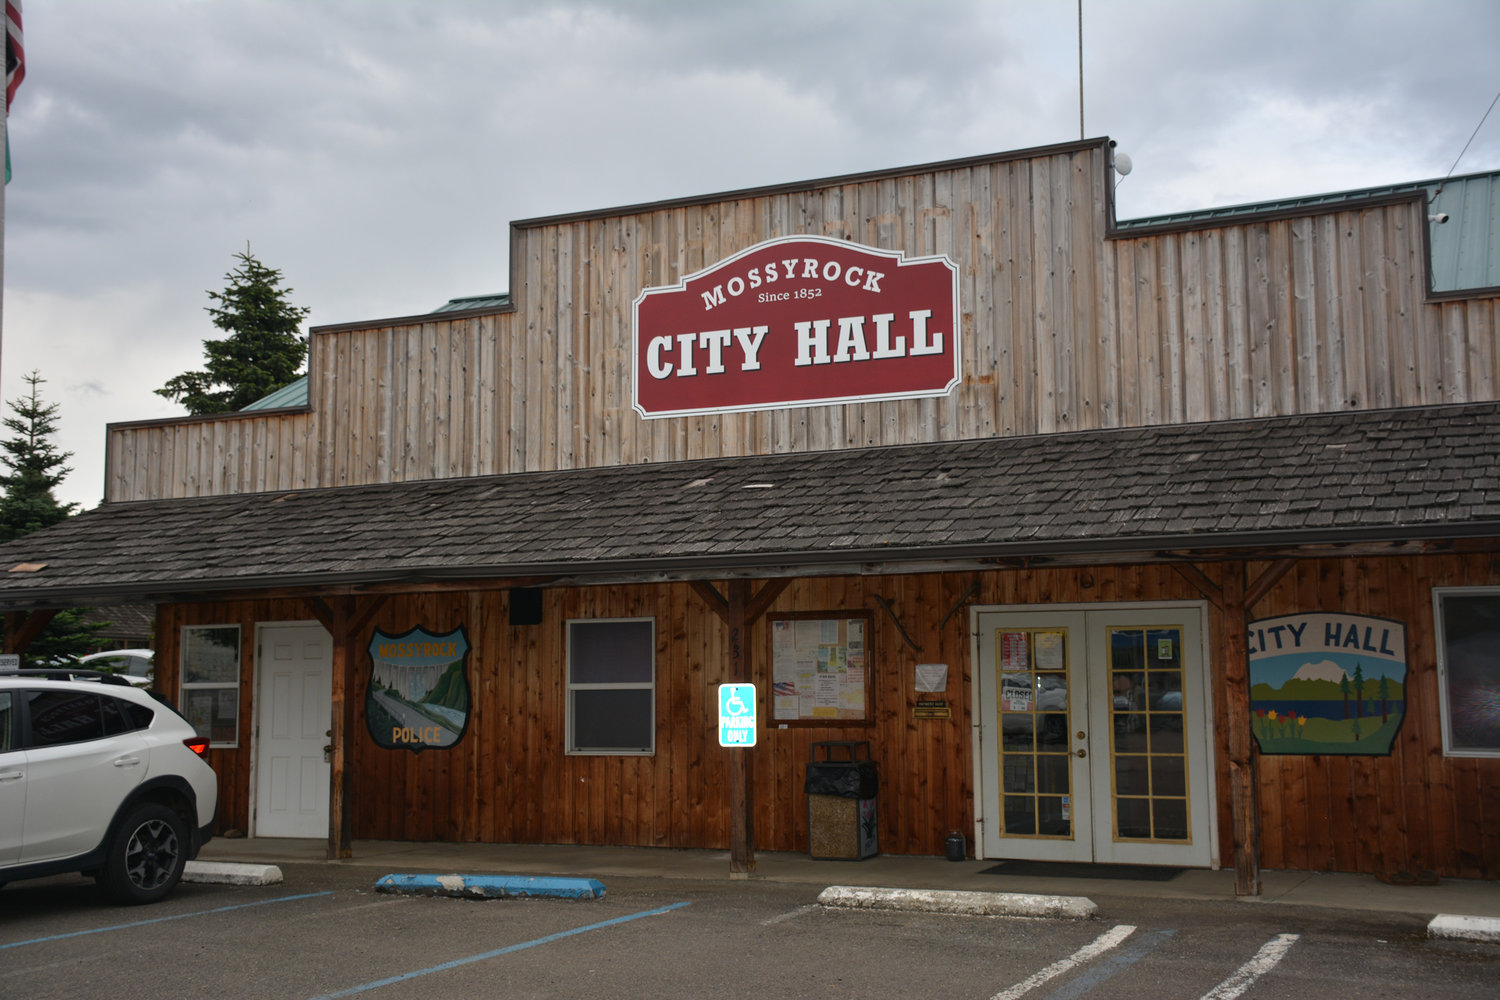 The City of Mossyrock passed a resolution Thursday declaring it will not enforce COVID-19 restrictions going into the summer season.